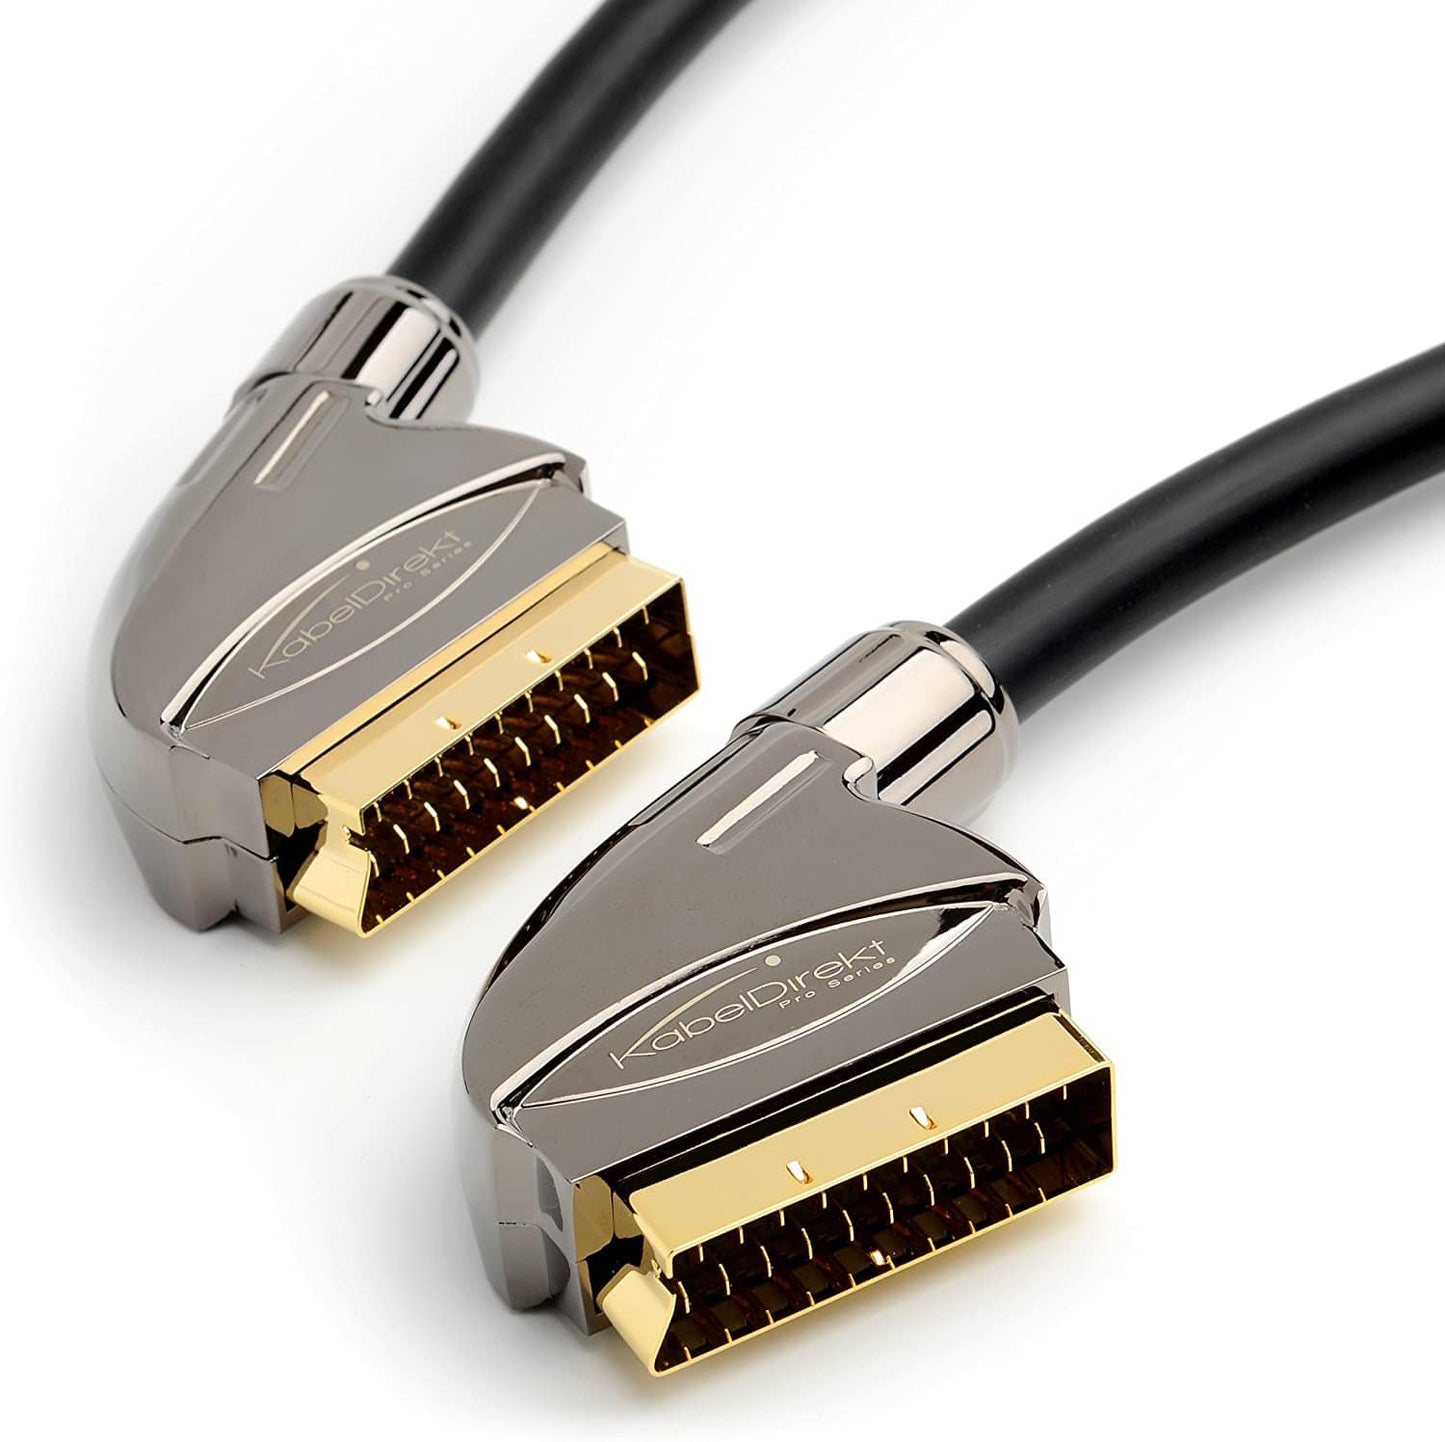 SCART cable - black, gold-plated connectors